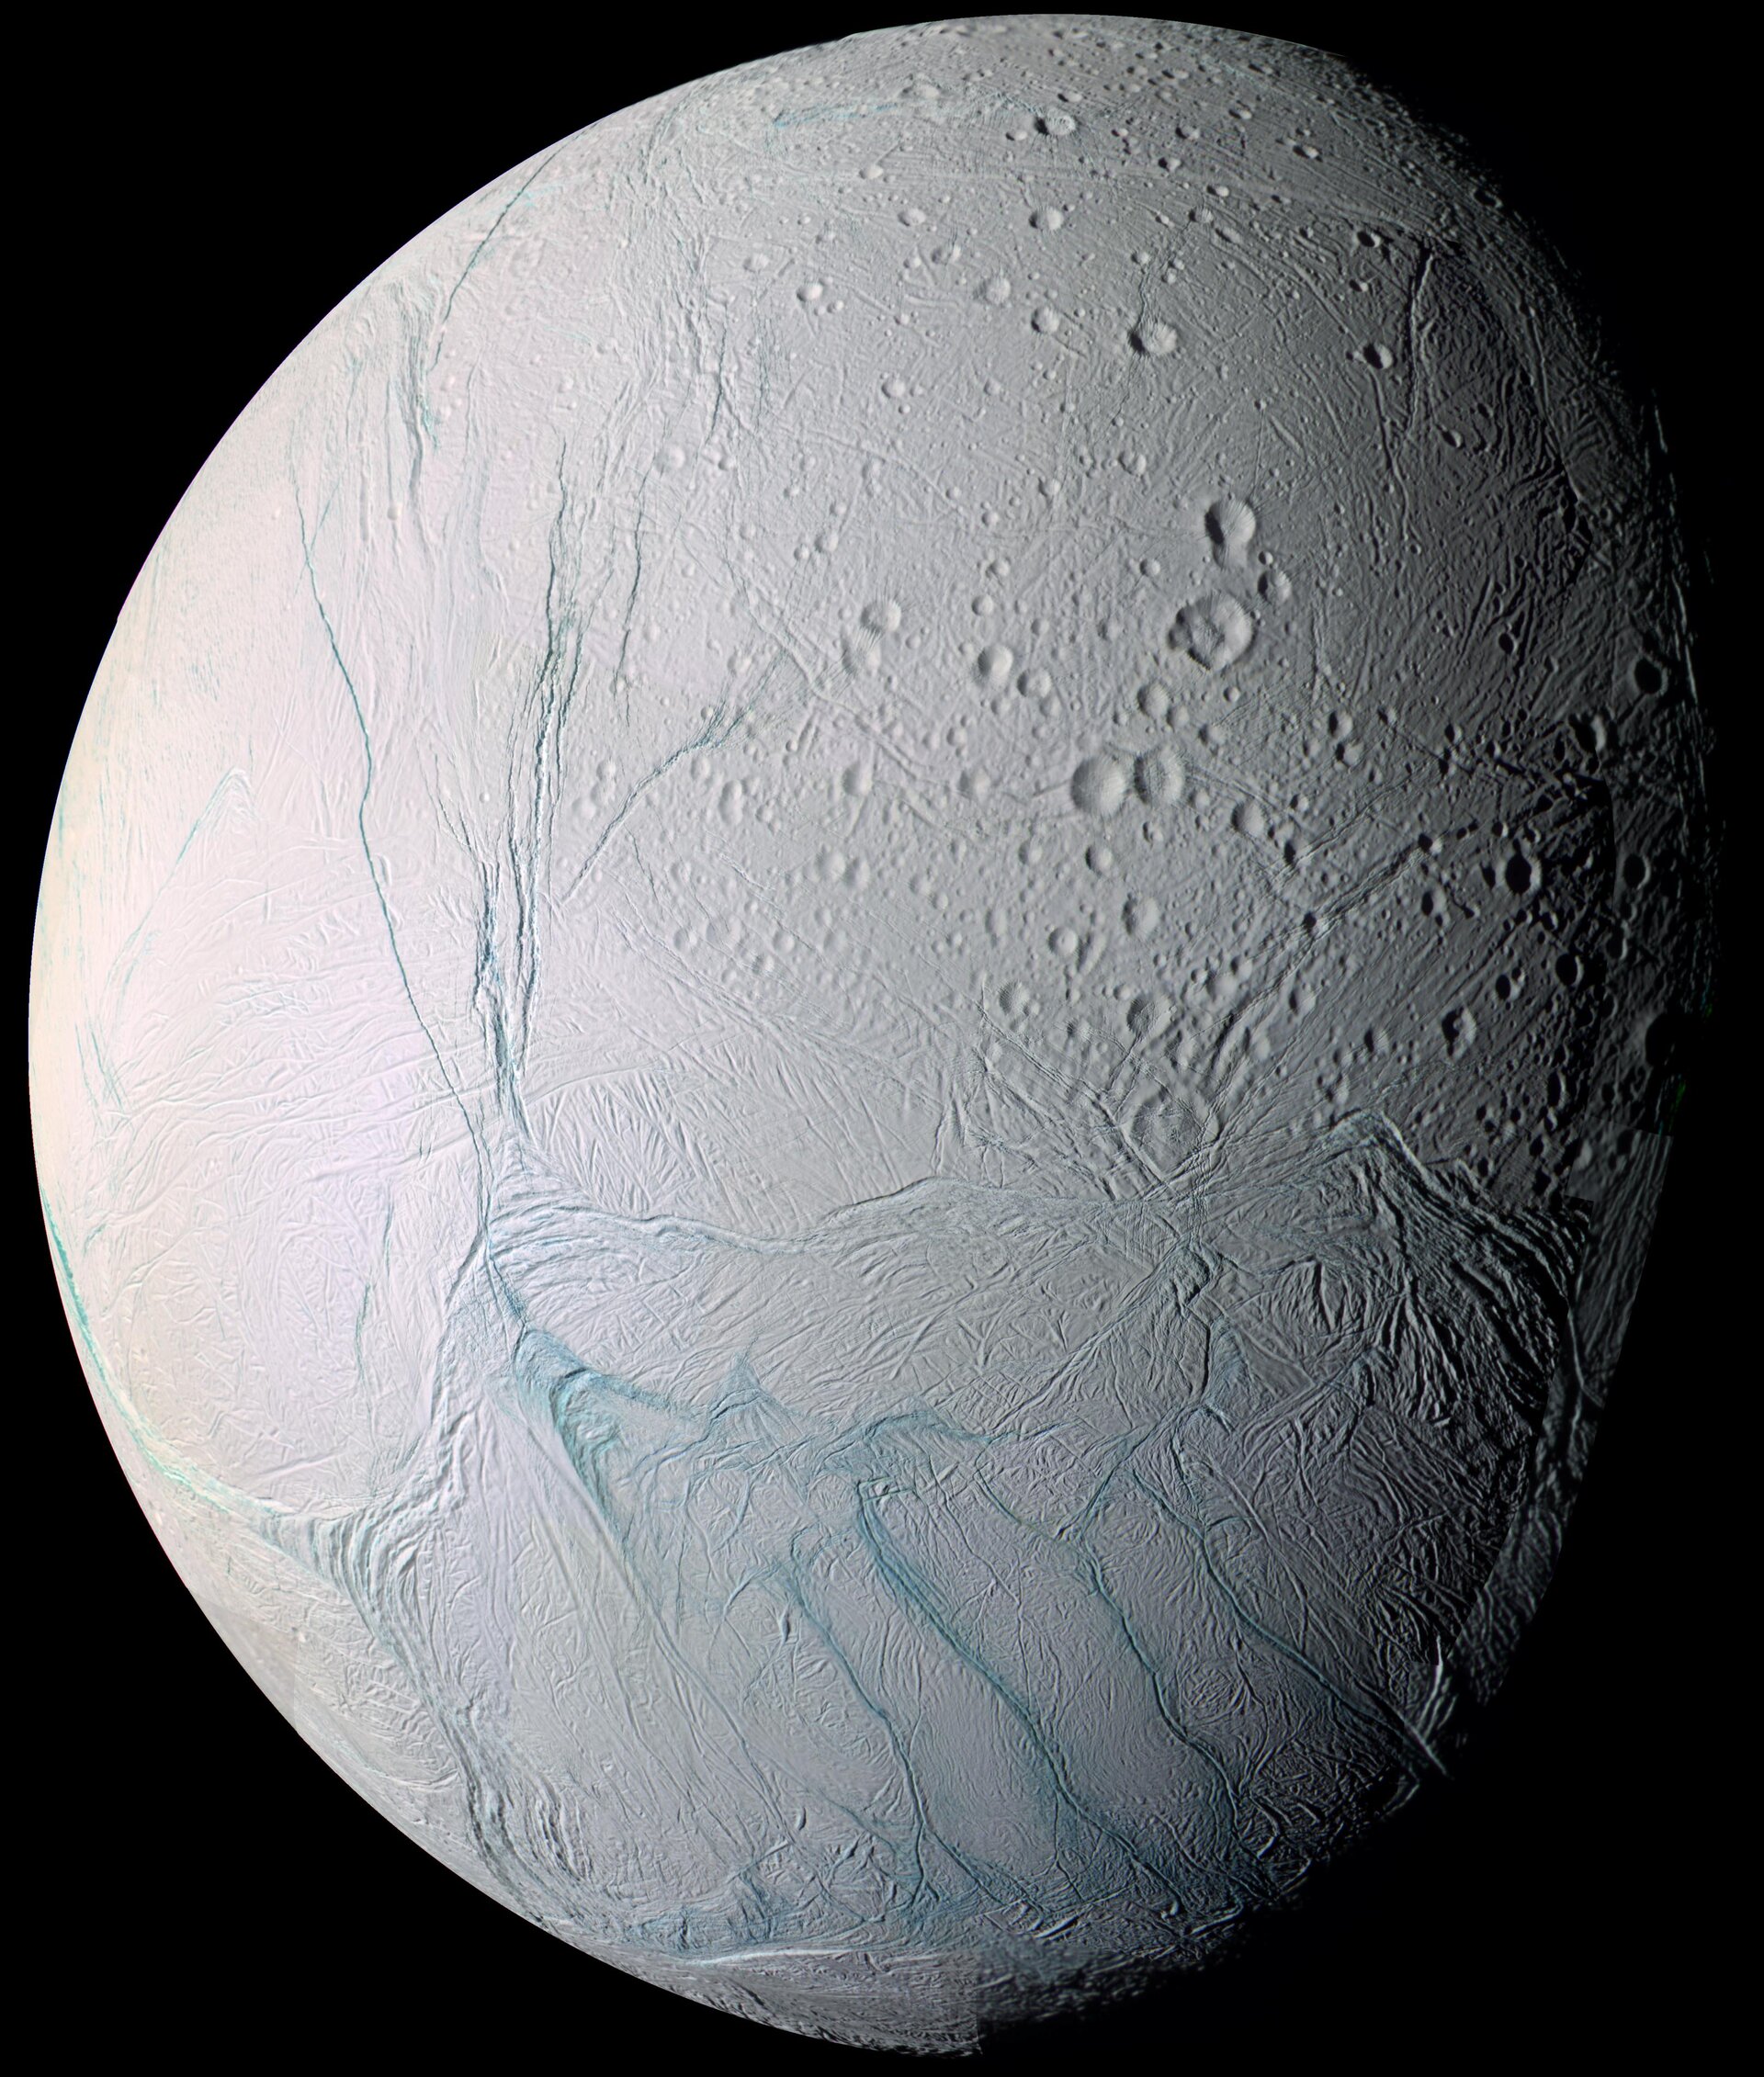 Enceladus' craters and complex, fractured terrains